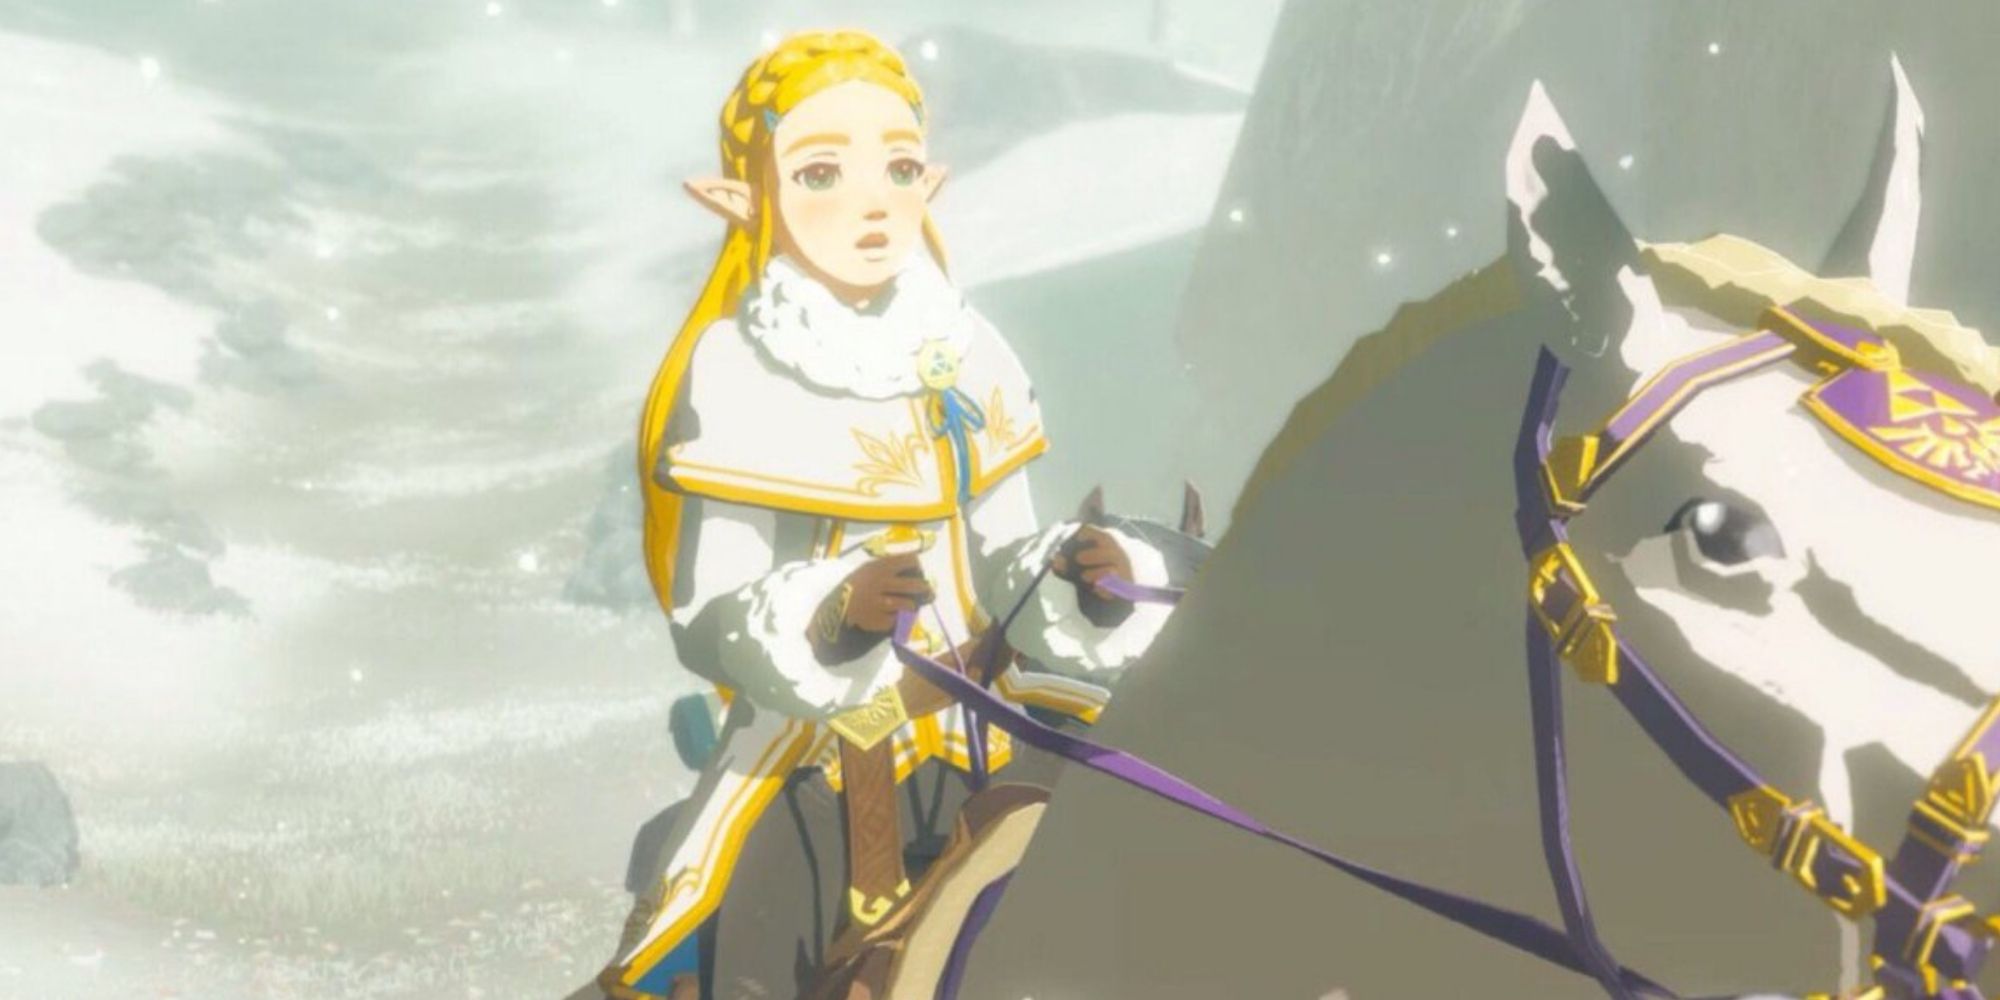 Zelda wearing her winter outfit while riding the white royal horse in Breath of the Wild.